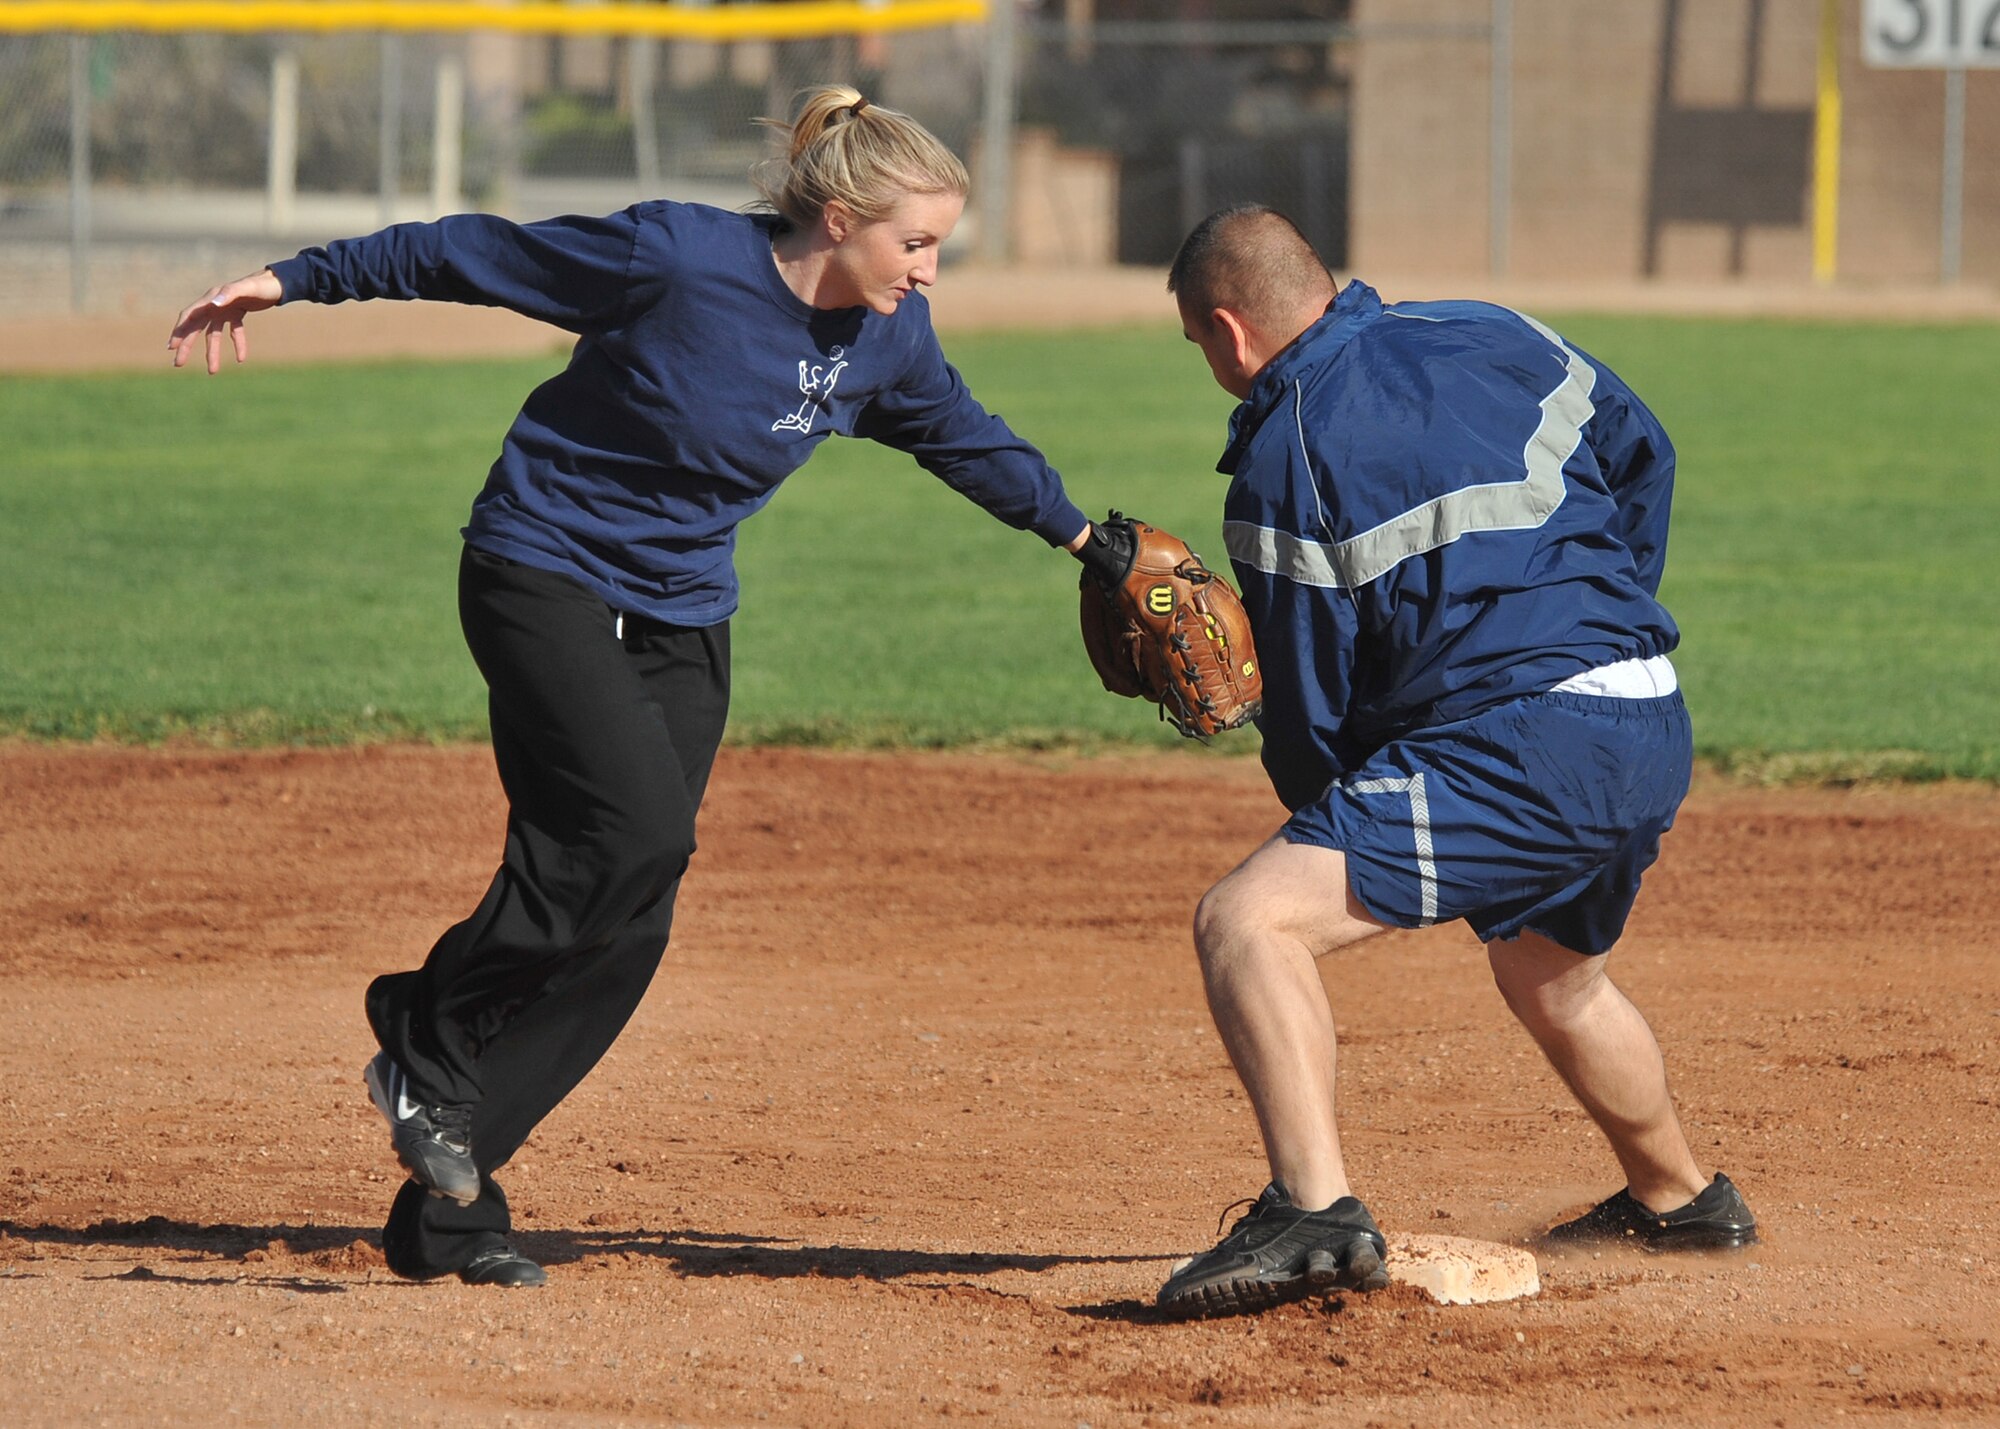 Civilian Jessica Zemer from the 498th reaches to get Master Sgt. Lawrence Prieto, 377th Logistics Readiness Squadron out at second base. U.S. Air Force Photo by Todd Berenger